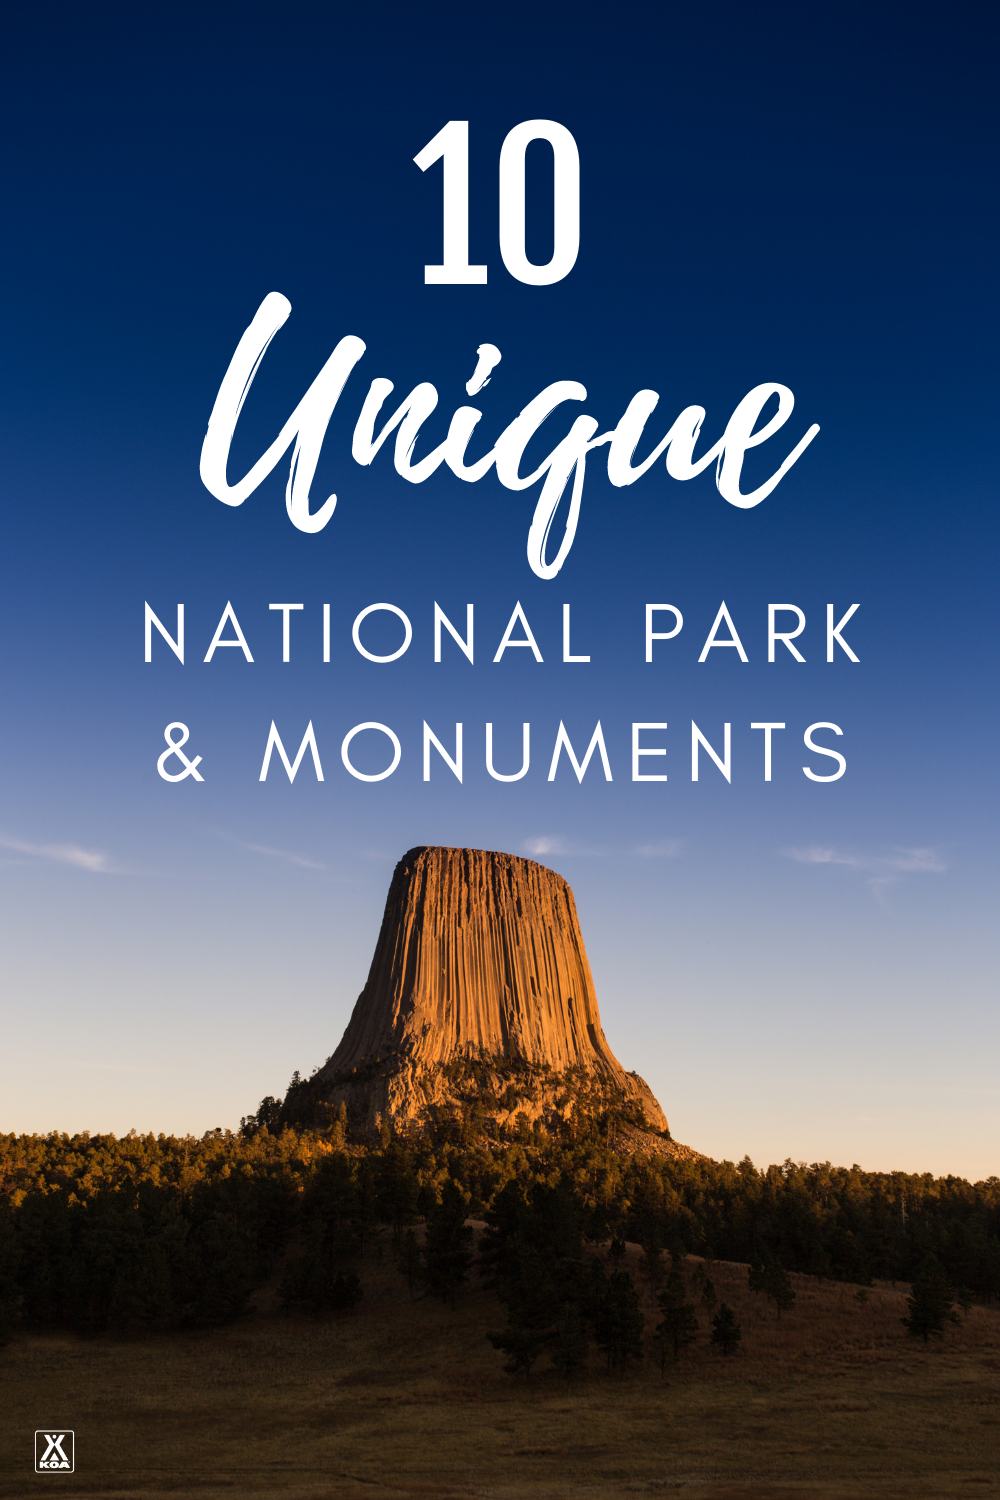 Think you've been everywhere? From a towering butte in Wyoming to a brick-clad fort in the middle of the sea, these are 10 unique National Parks and National Monuments to add to your travel itinerary.